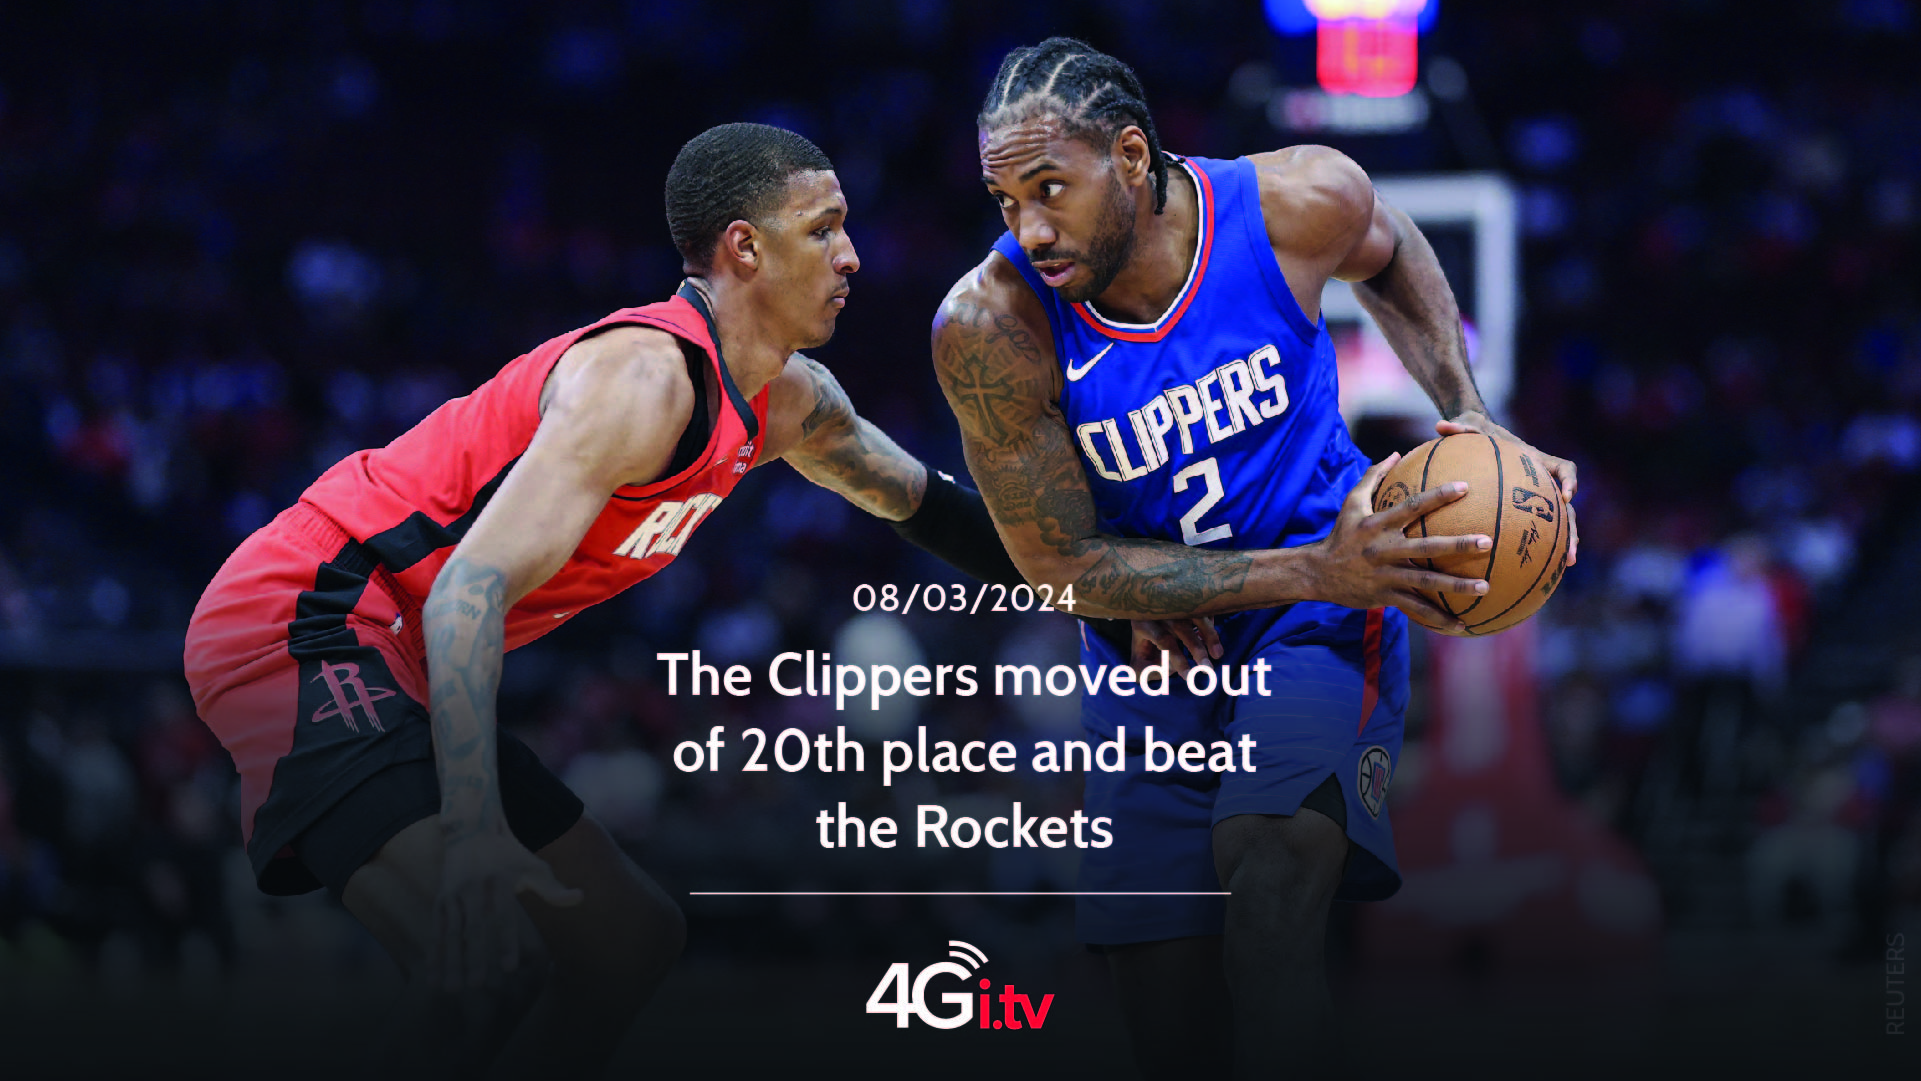 Lee más sobre el artículo The Clippers moved out of 20th place and beat the Rockets 